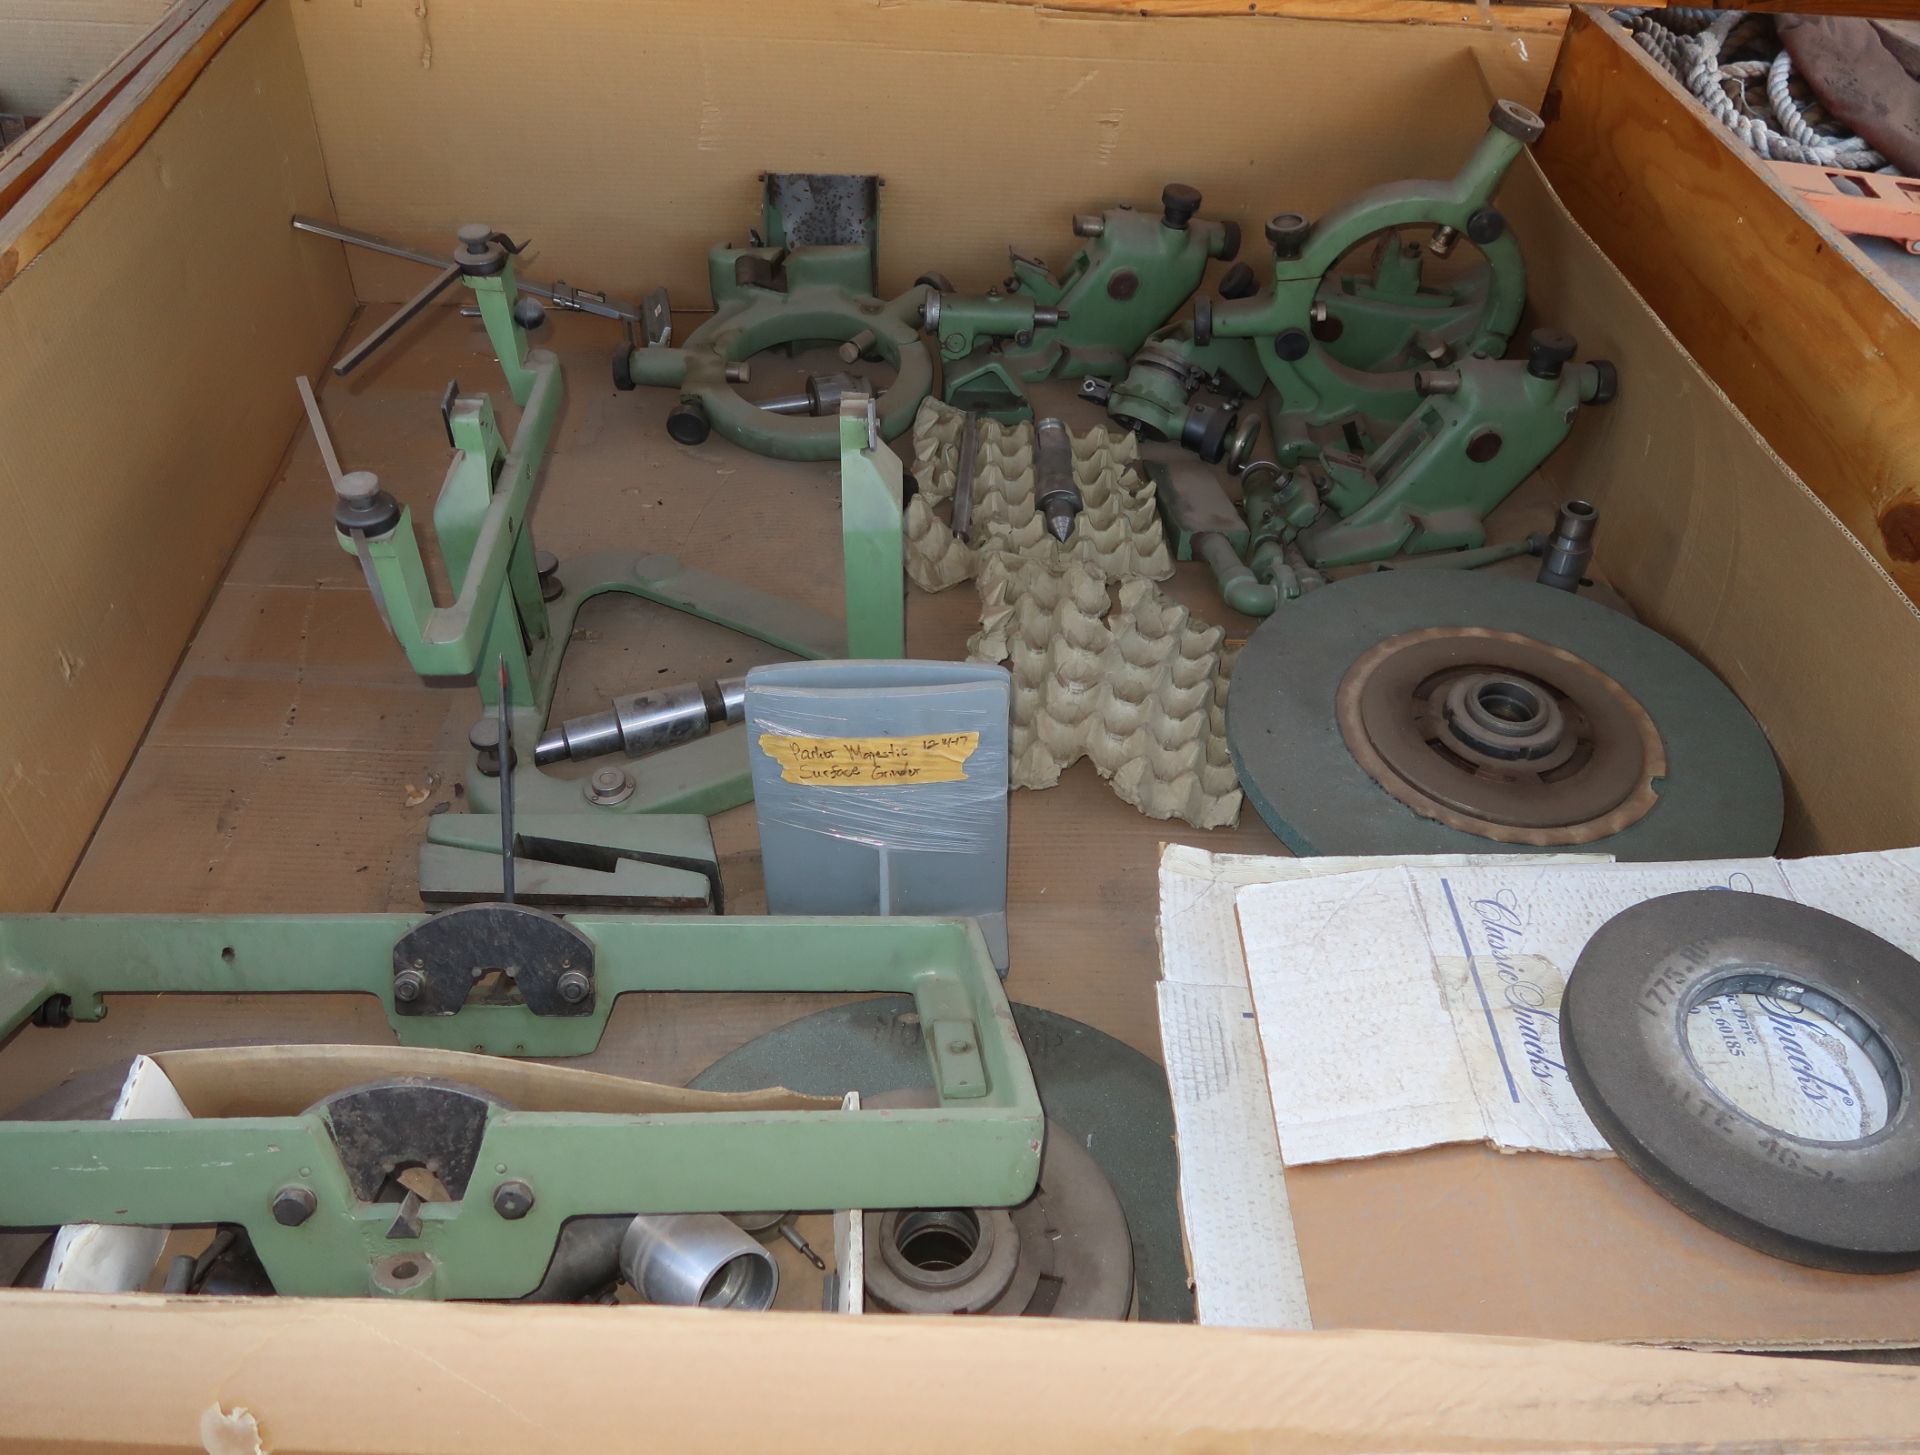 LOT STEADY RESTS, ANGLE ATTACHMENTS, CENTER, CHUCK, GRINDING WHEELS, CENTER FIXTURE, ETC. - Image 2 of 2